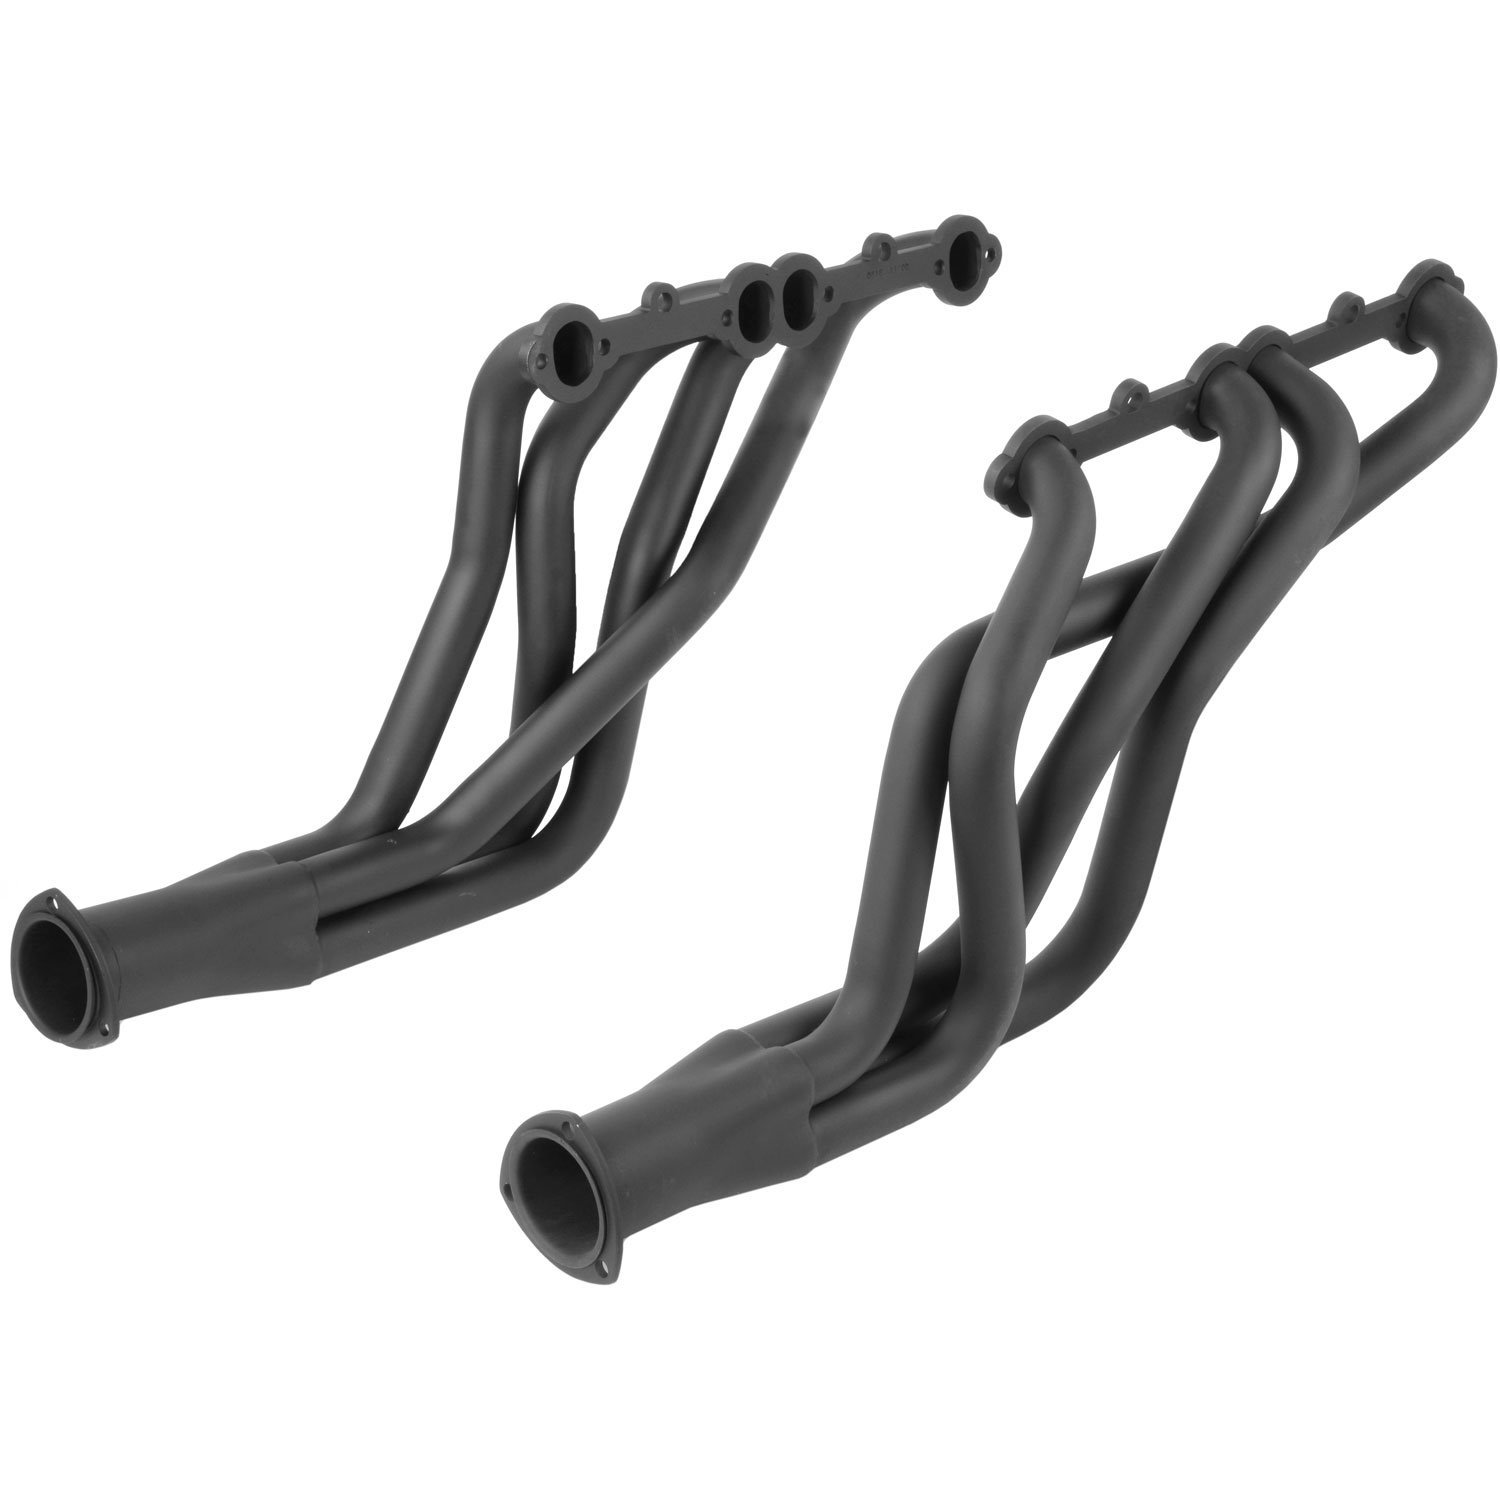 Painted Long Tube Headers for 1964-1989 GM Passenger Cars with Small Block Chevy 265-400 ci